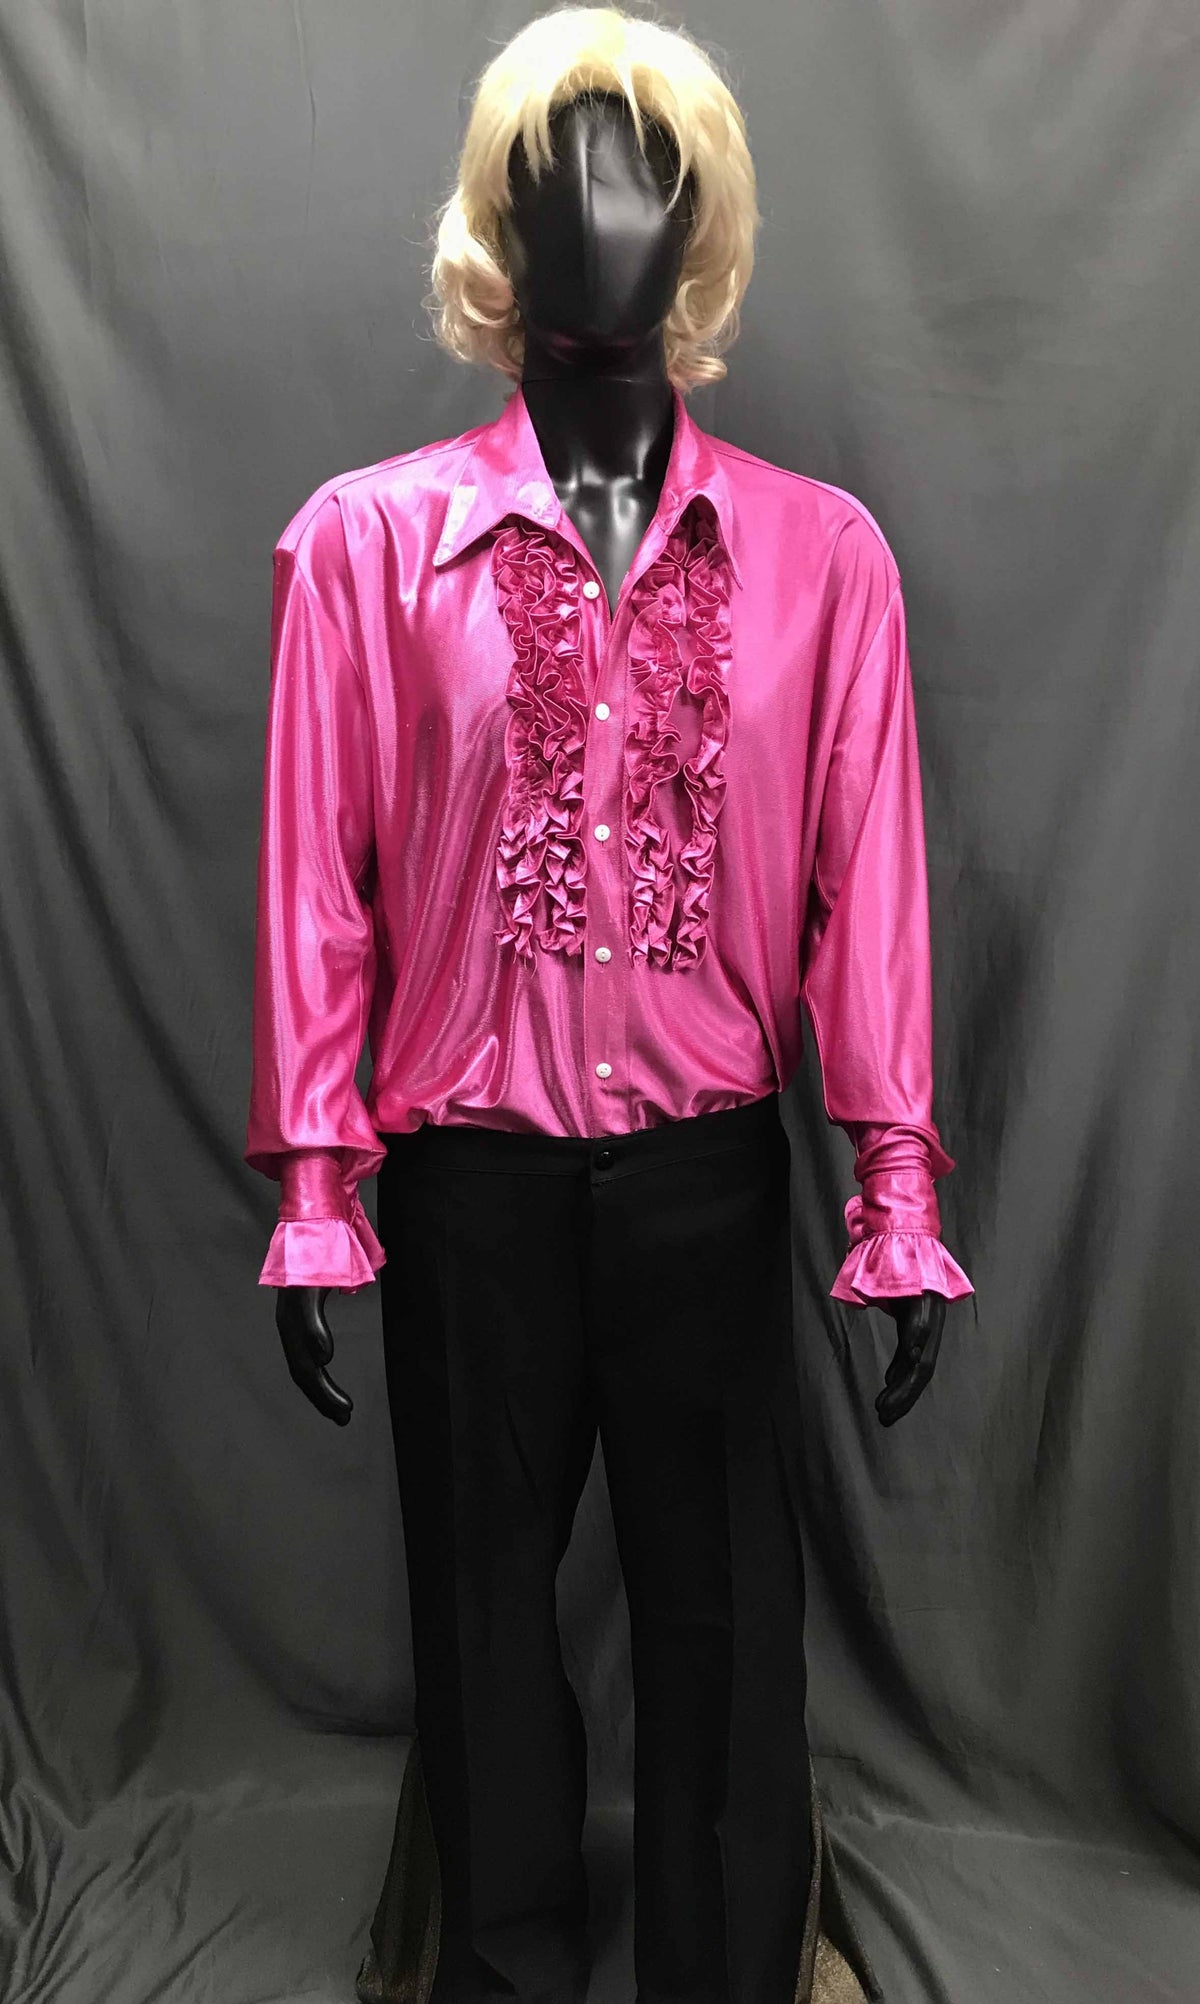 Mens Disco Costume - Wedding Singer Shirt with Black Flares - Hire